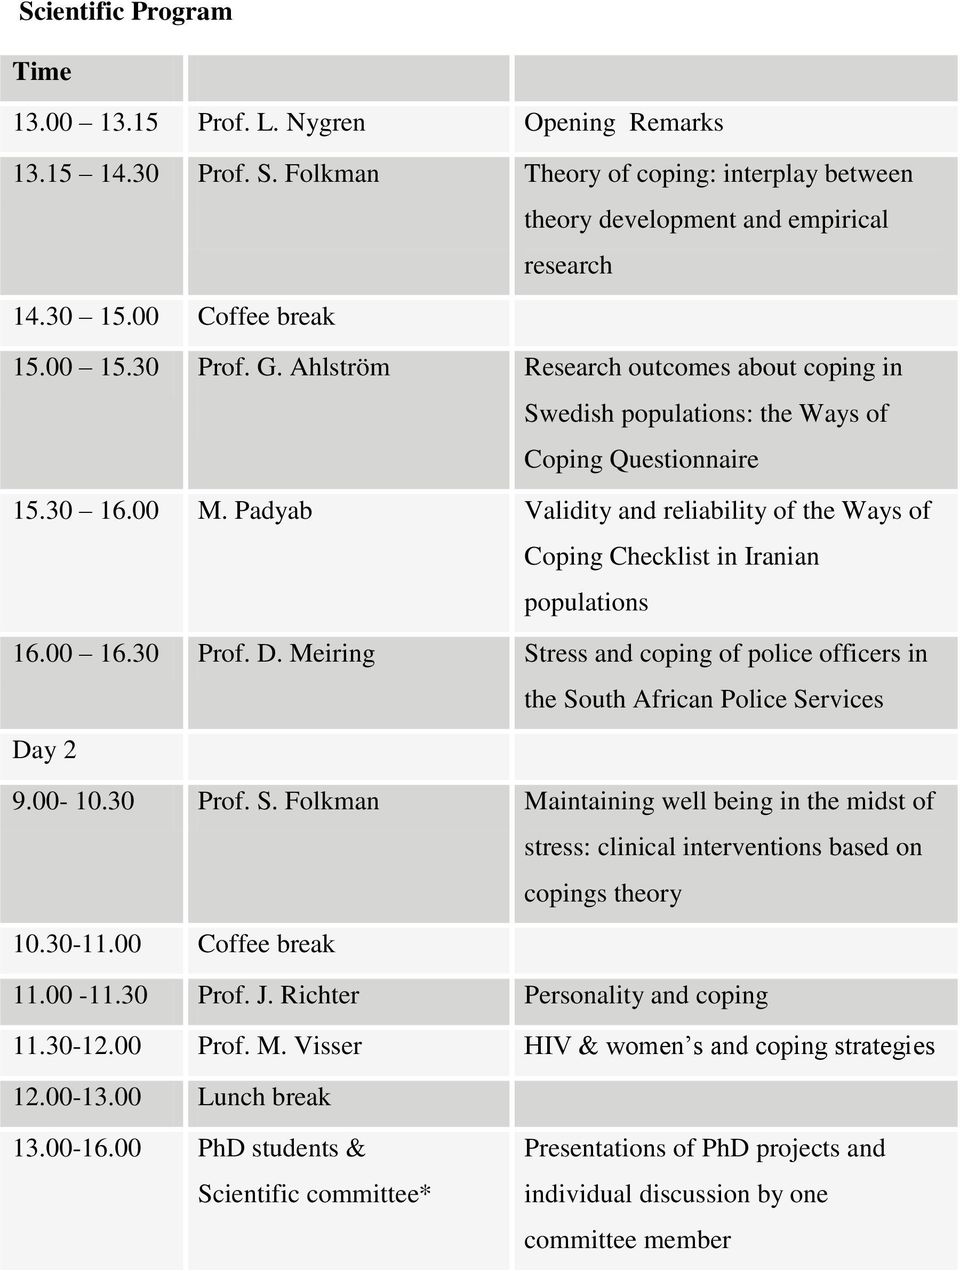 Padyab Validity and reliability of the Ways of Coping Checklist in Iranian populations 16.00 16.30 Prof. D. Meiring Stress and coping of police officers in the South African Police Services Day 2 9.